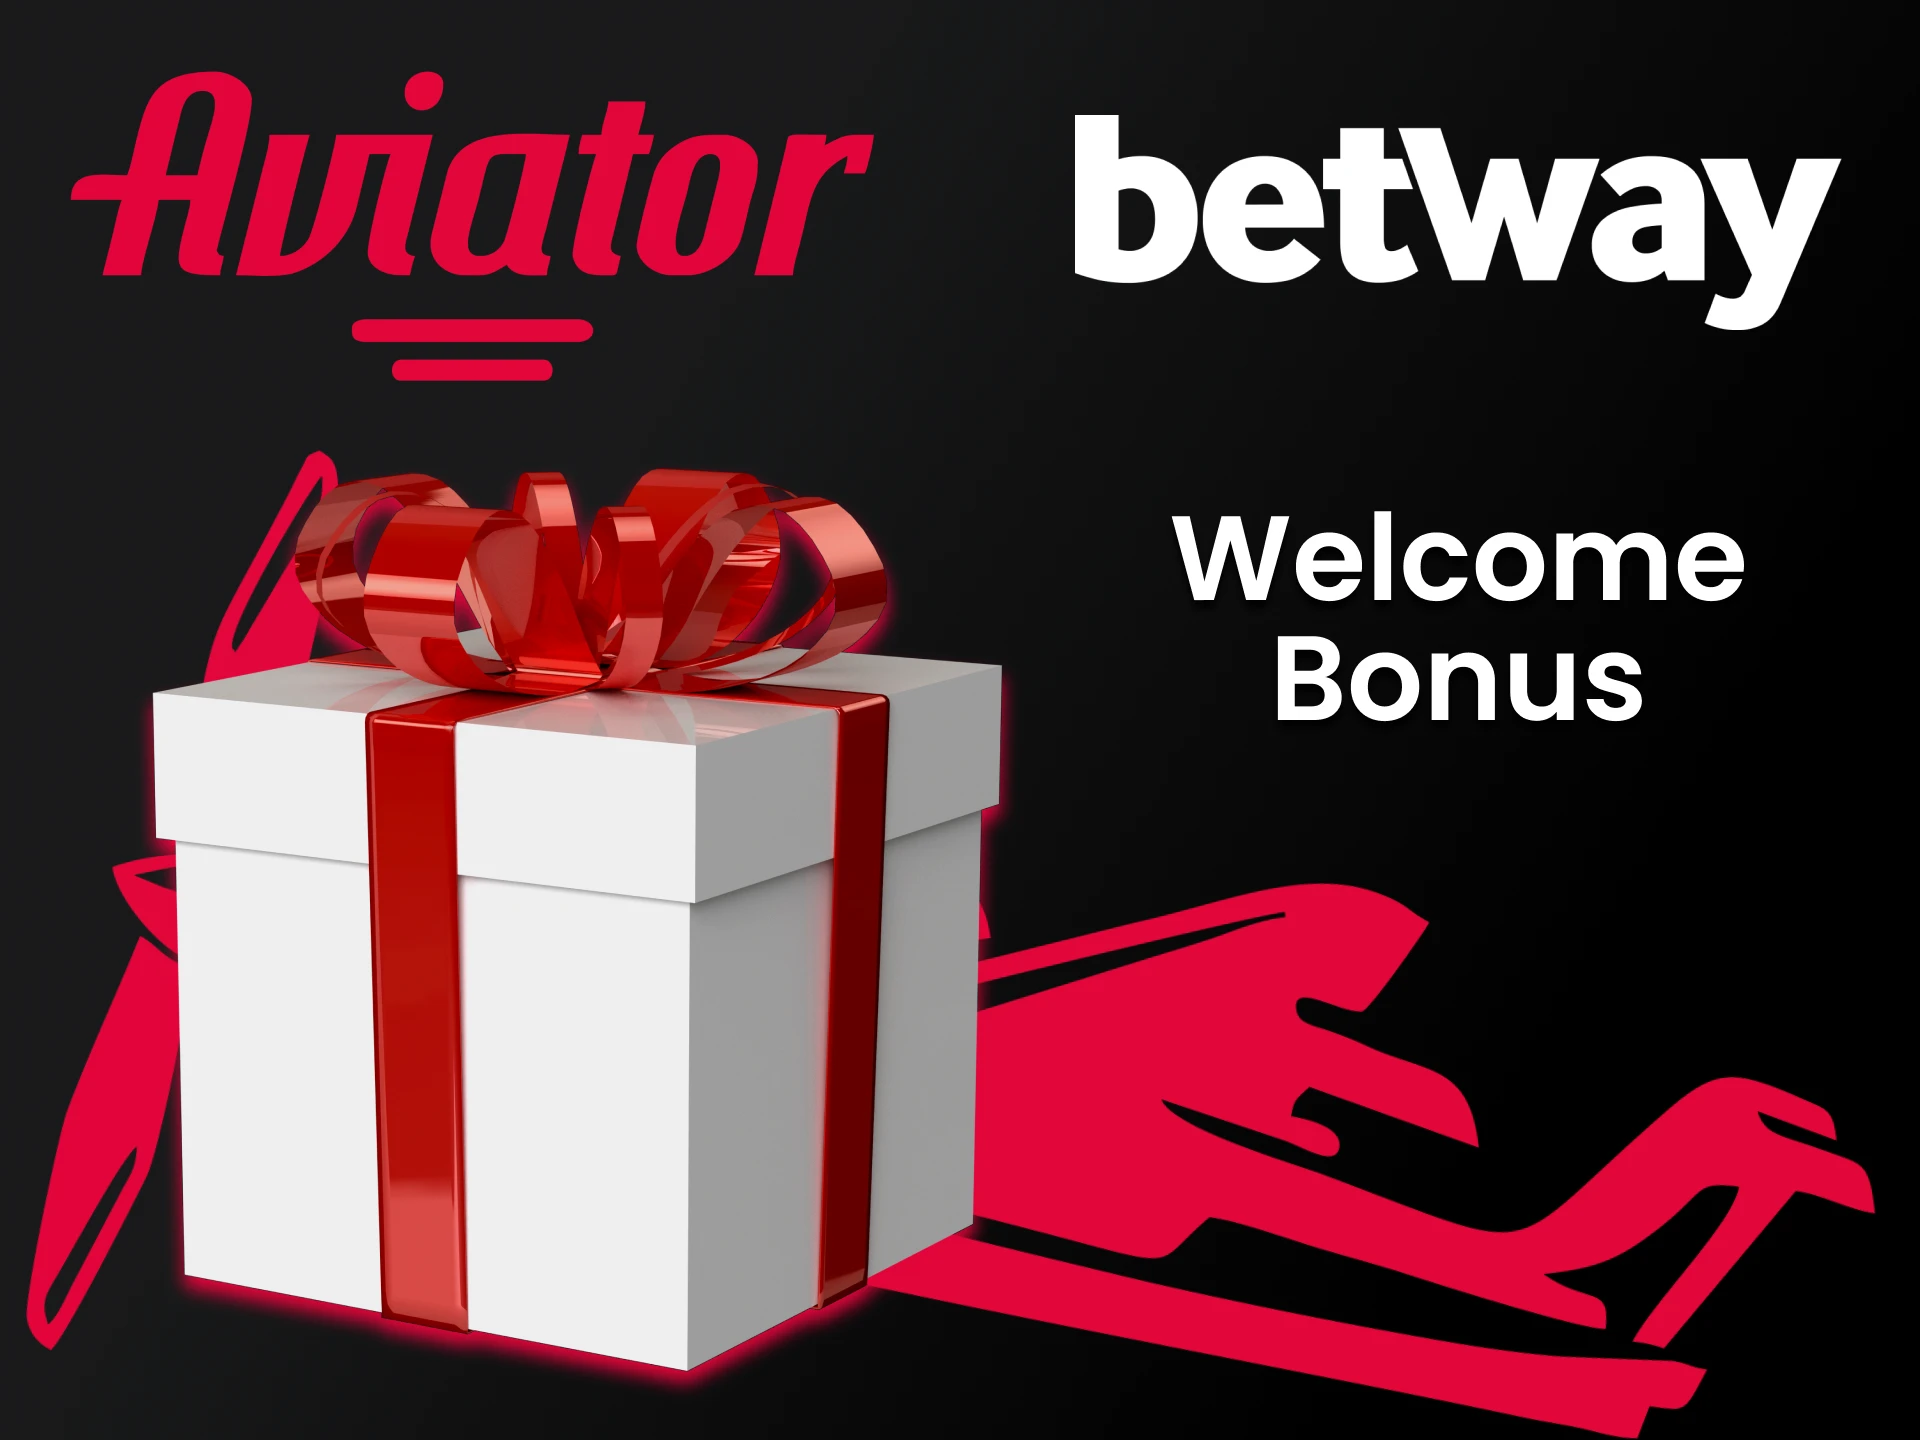 Betway offers many bonuses for new players.